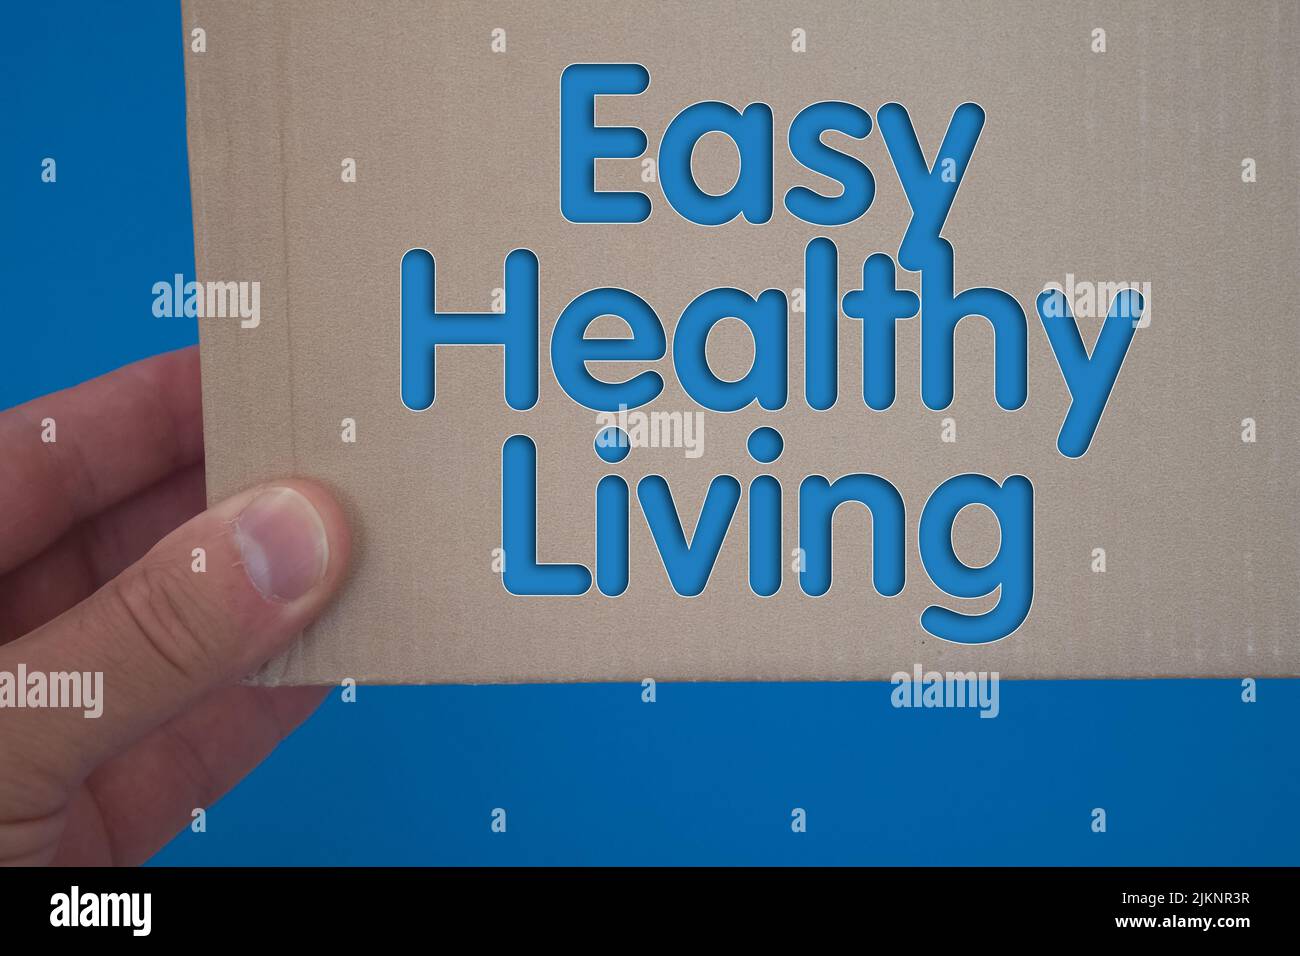 Easy Healthy Living word with cardboard box. Brown folded cardbox. Stock Photo